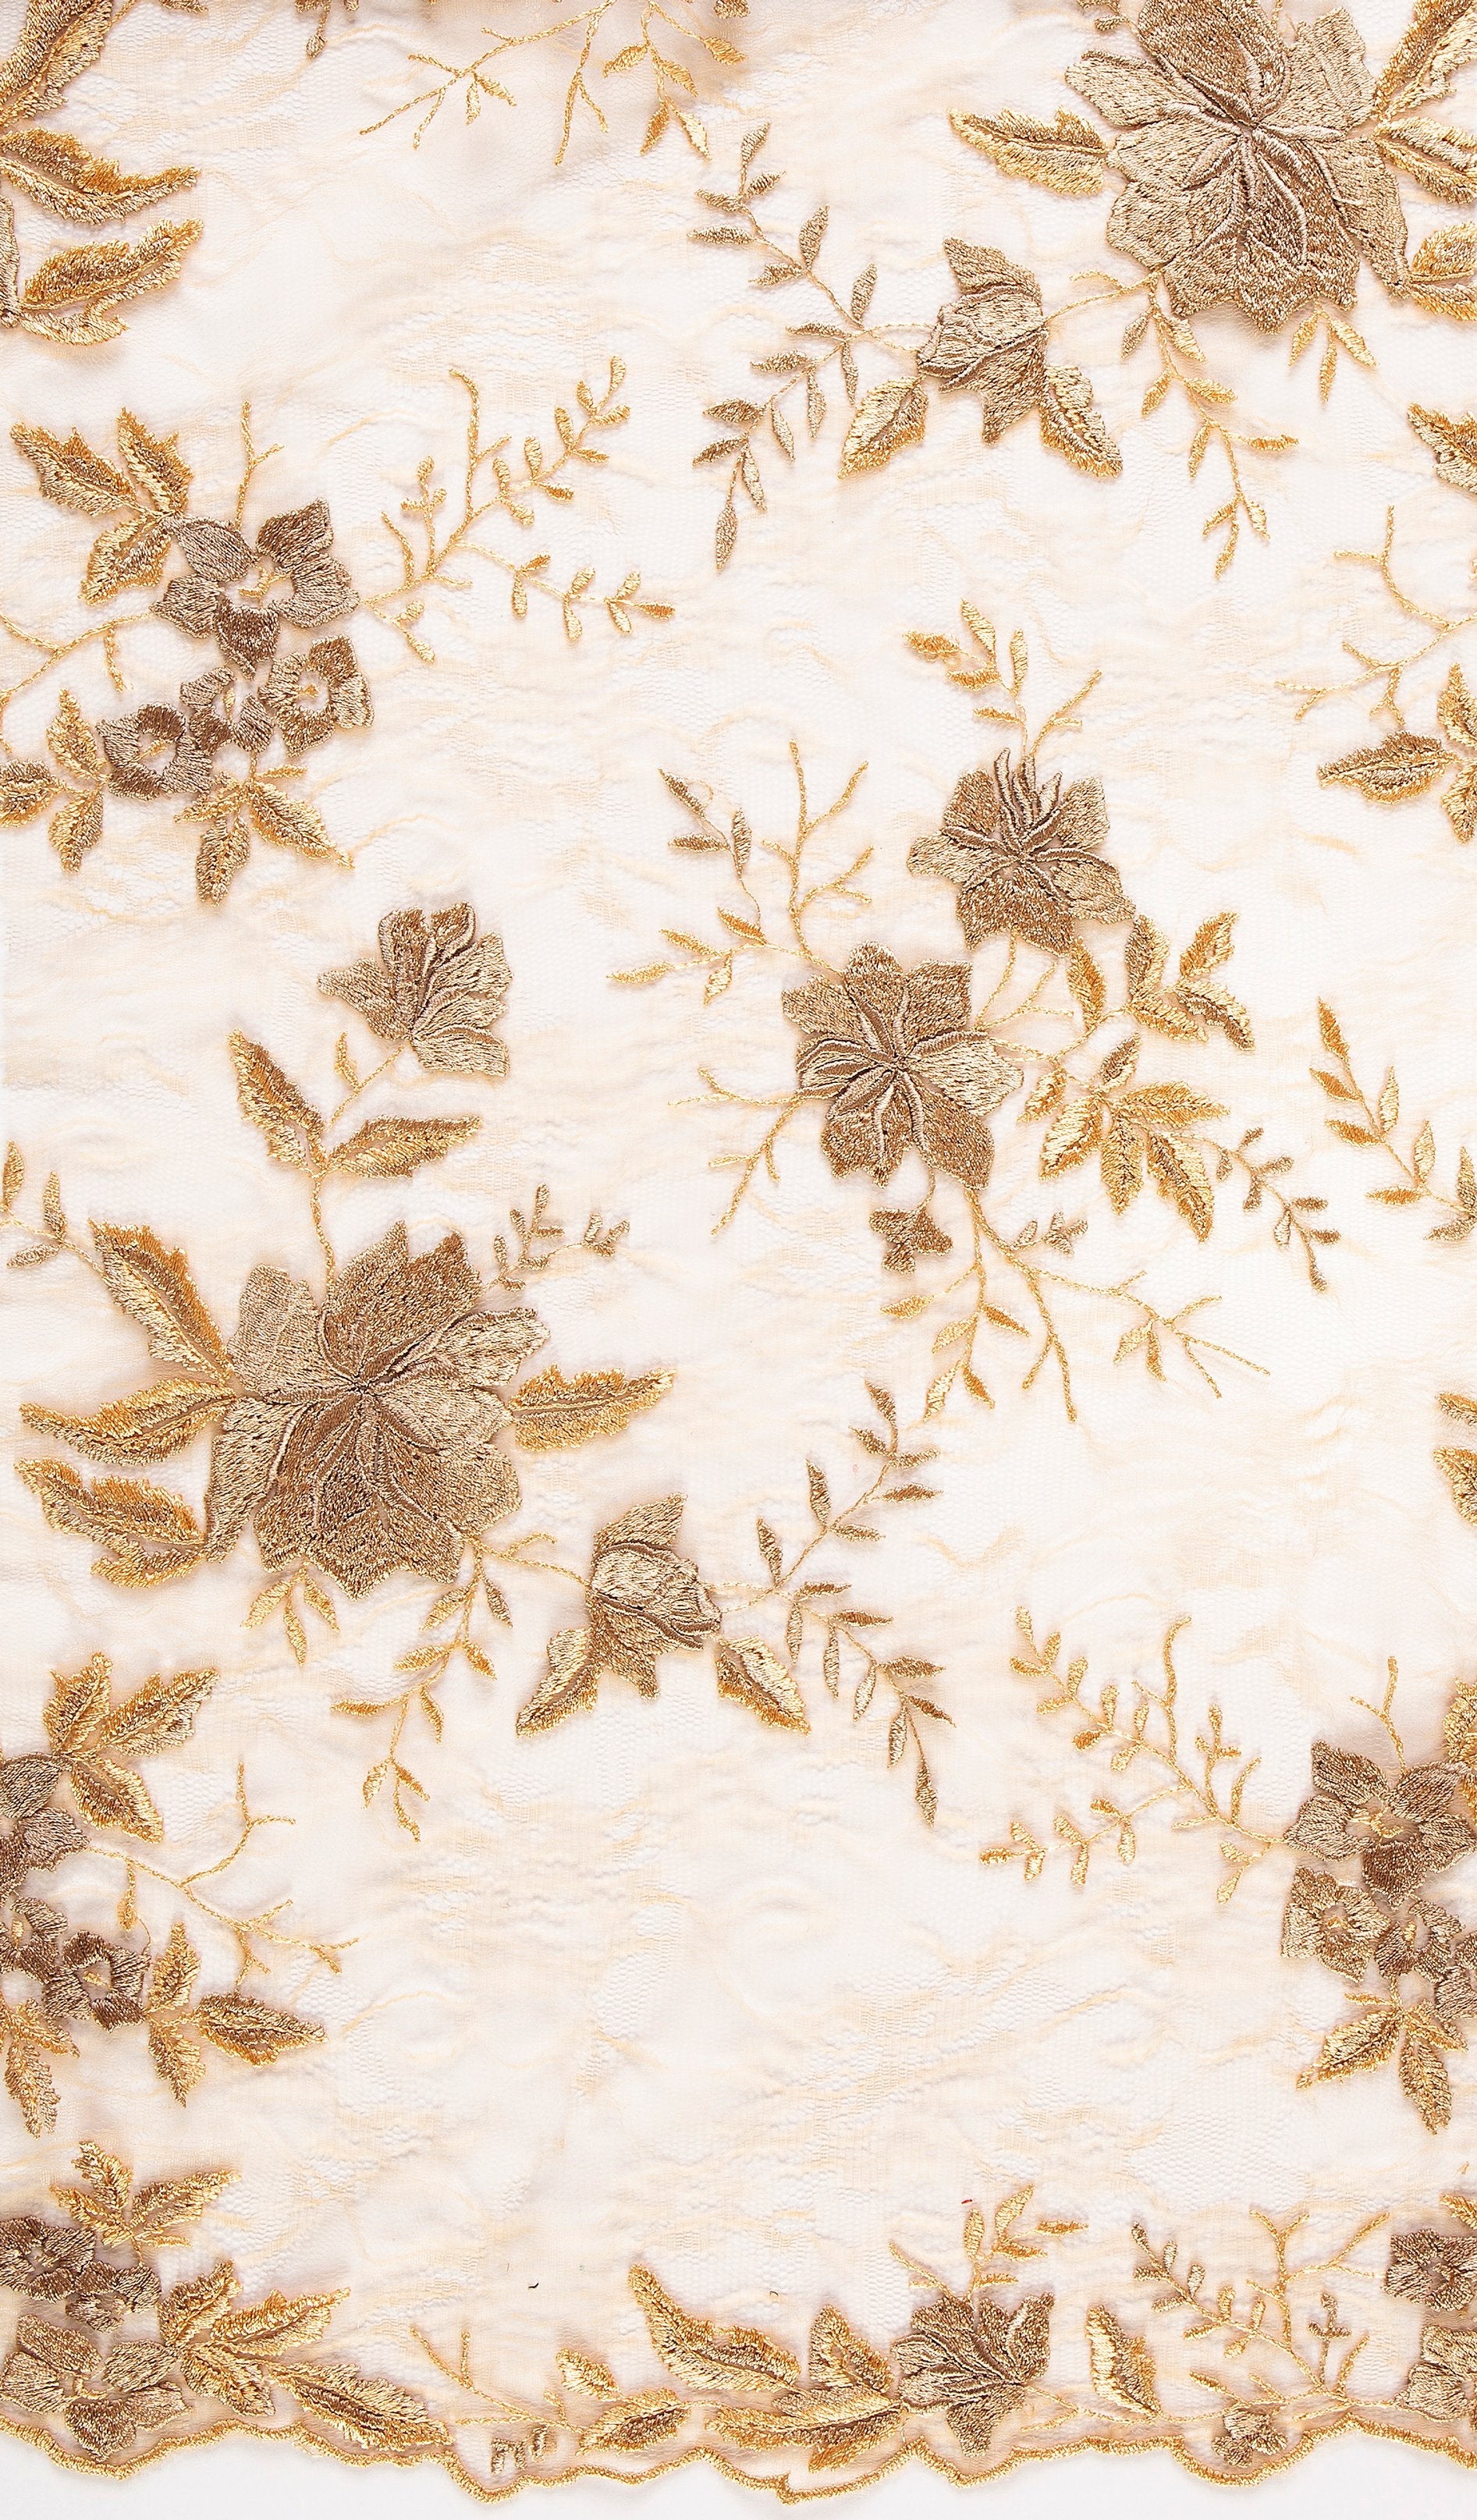 Mallorca Style Gold Floral Embroidered Lace Fabric | Burç Fabric